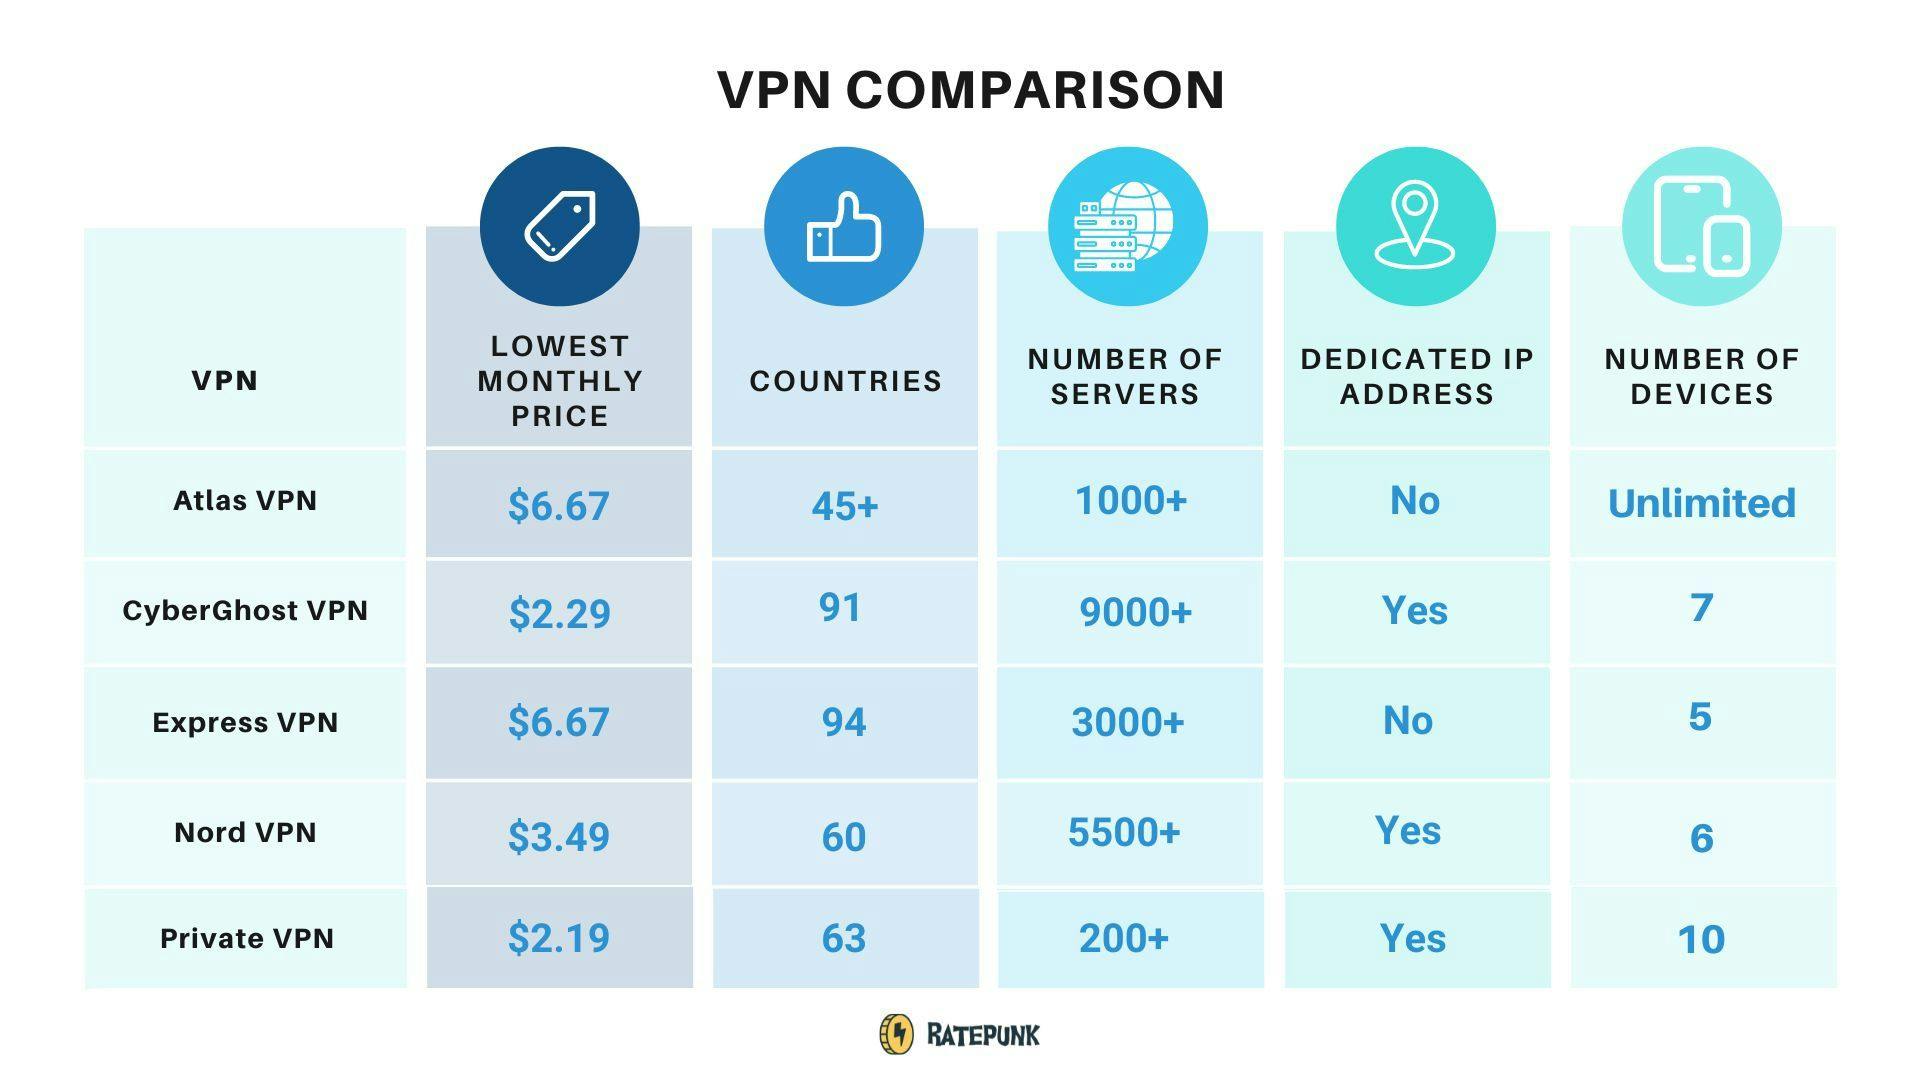 Protect Your Data While Traveling with VPN - Comparison Chart by Ratepunk